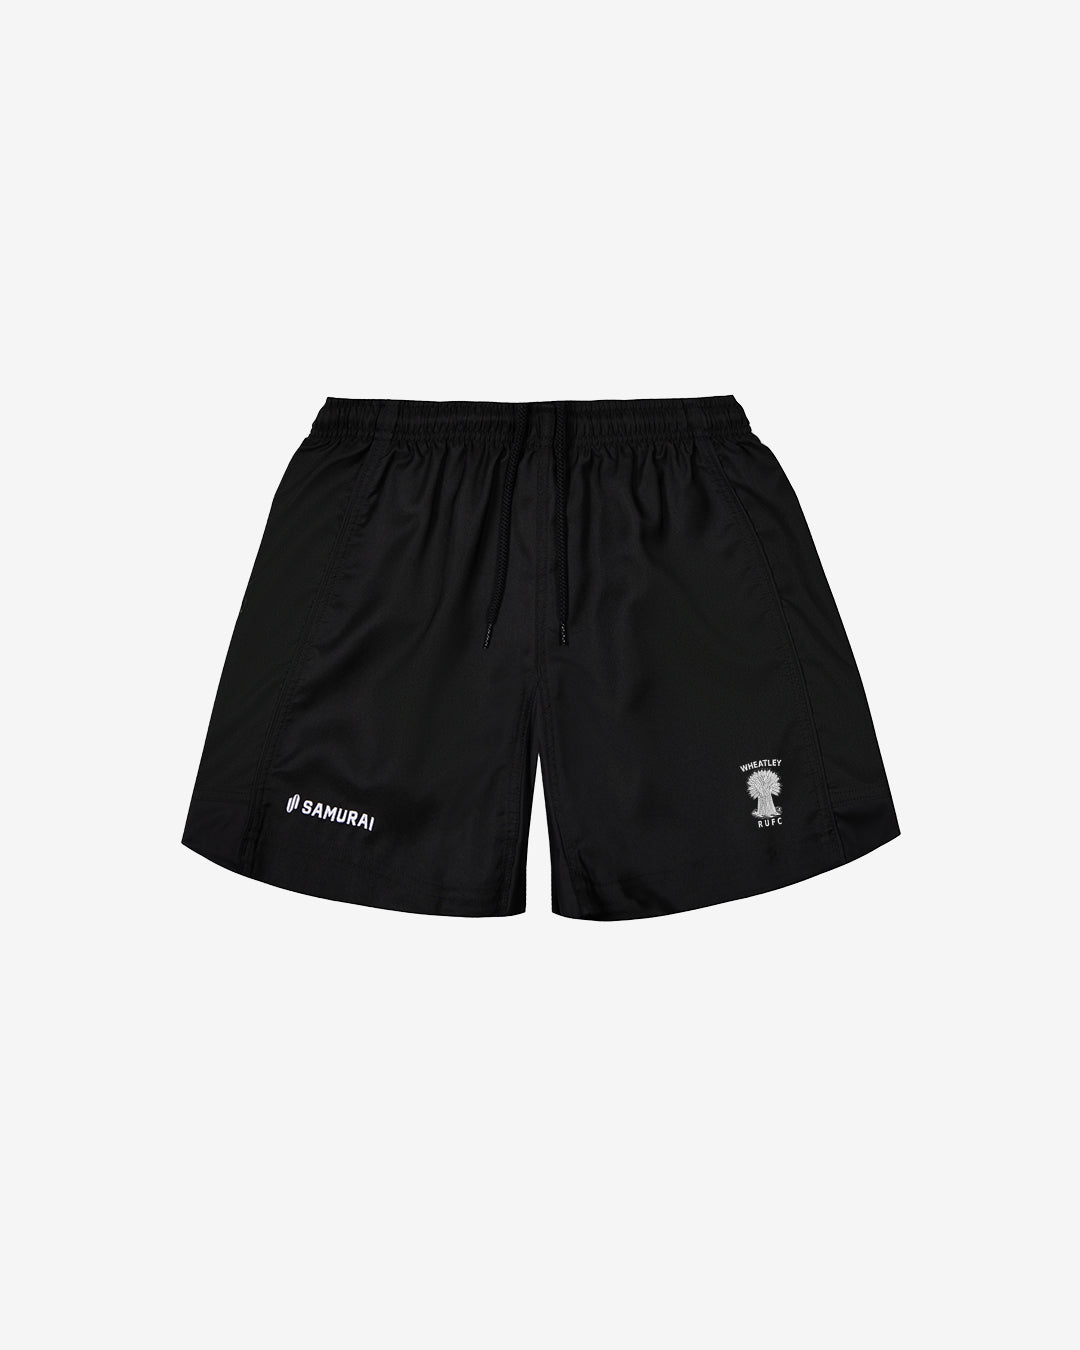 Wheatley RUFC - EP:0119 - Rugby Short - Black